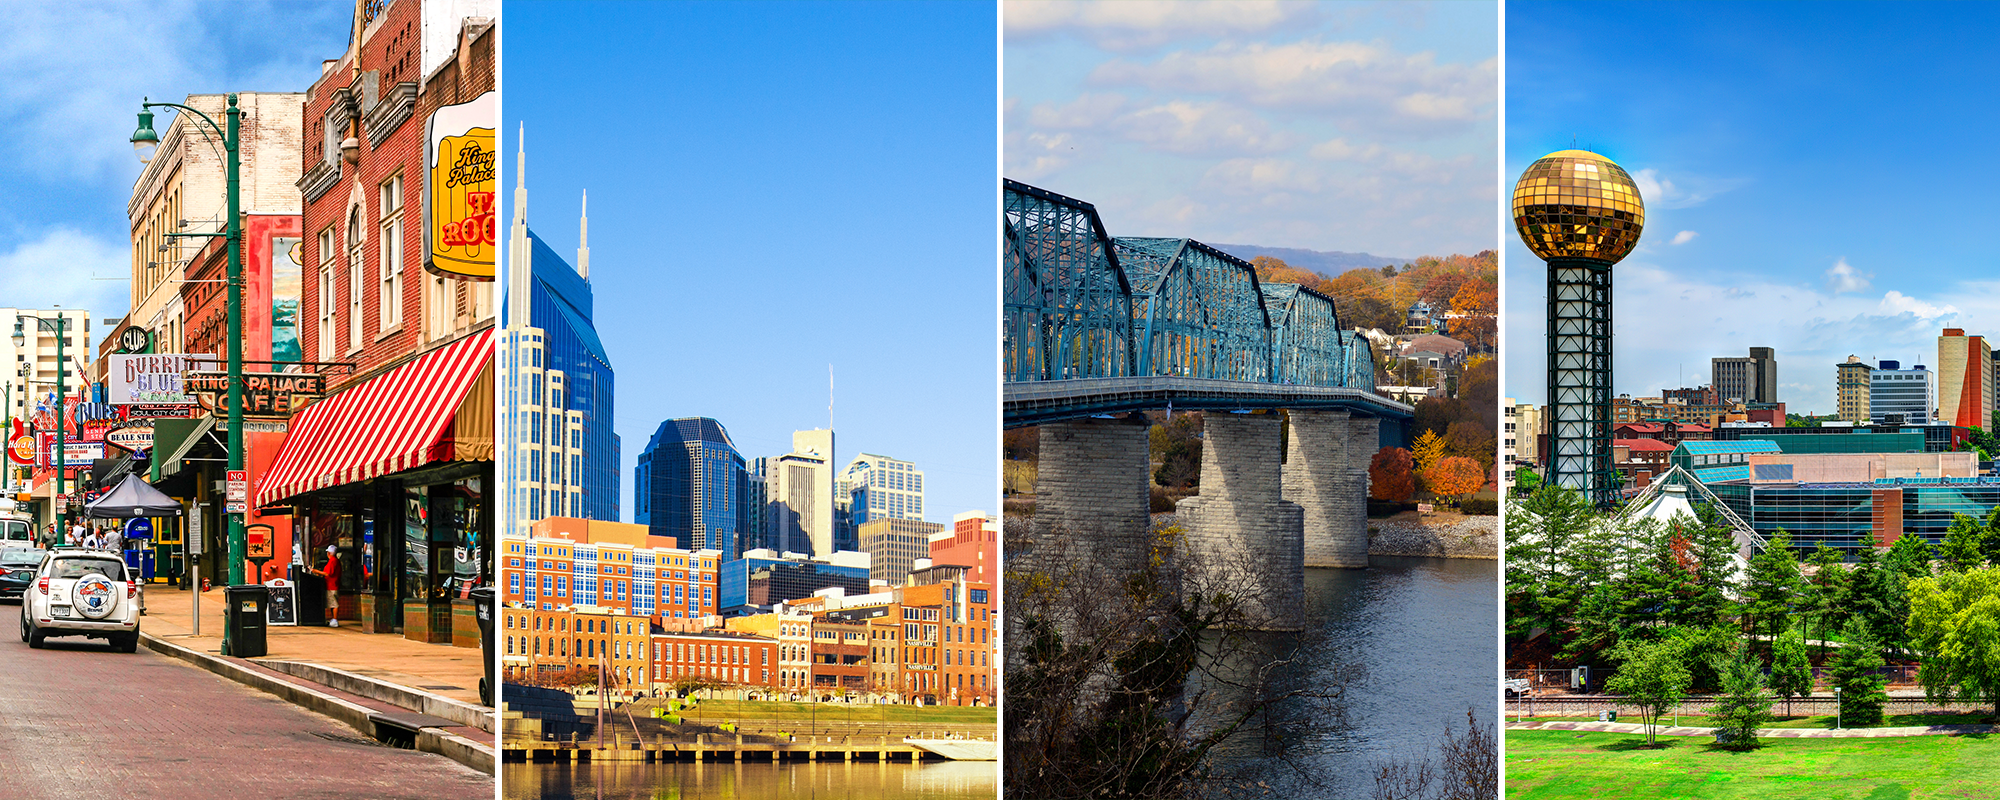 Photos of Beale Street, Nashville skyline, Chattanooga and Knoxville